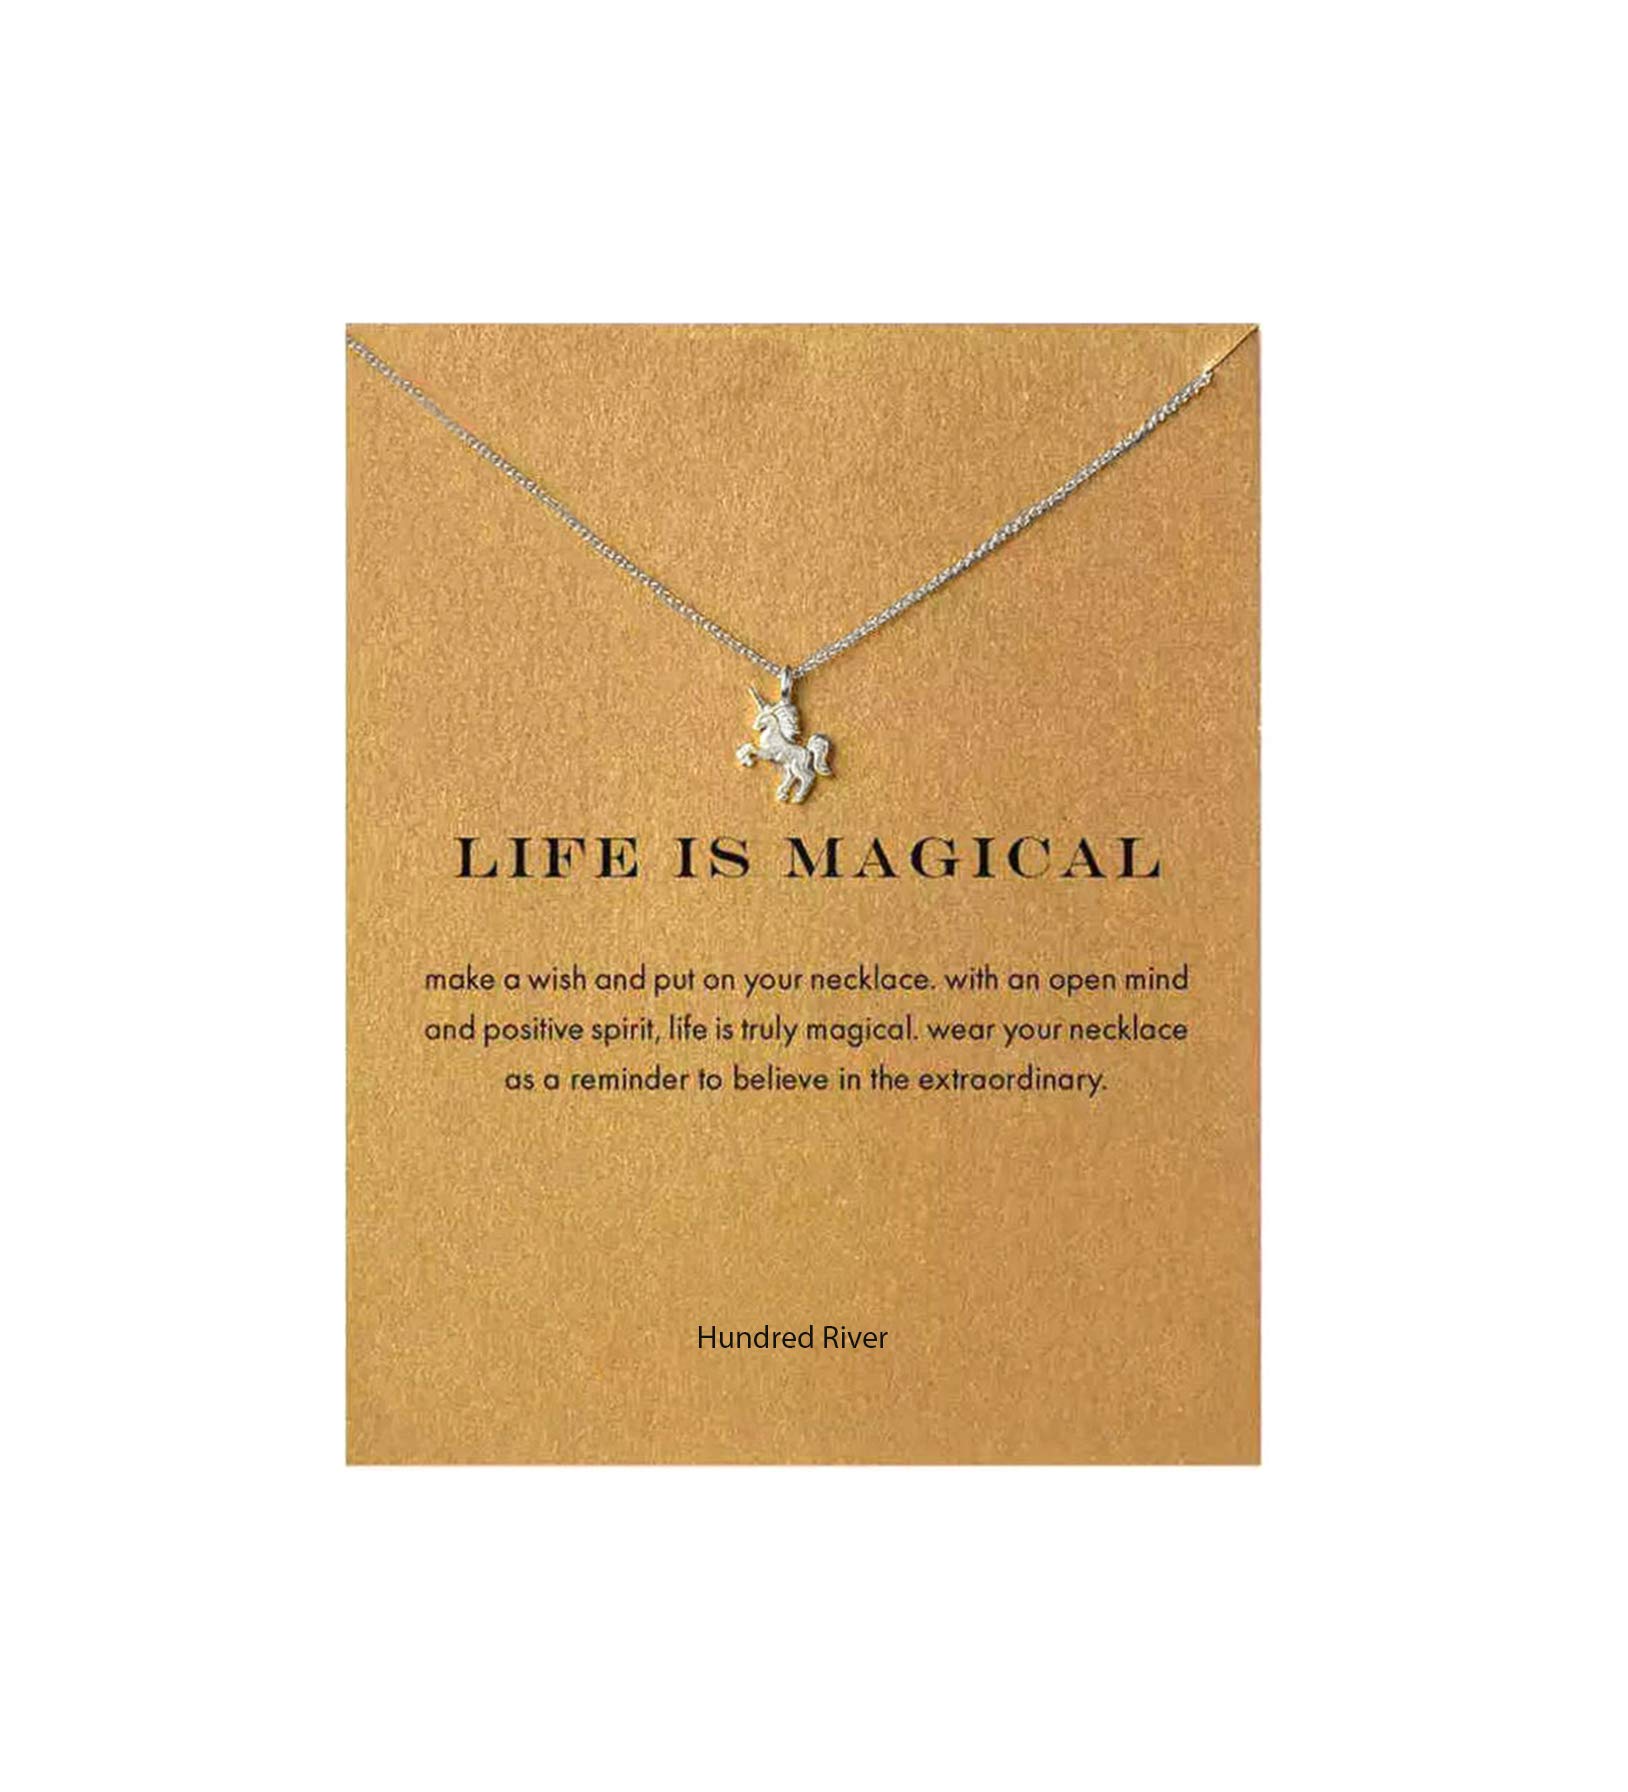 Baydurcan Friendship Anchor Compass Necklace Good Luck Elephant Pendant Chain Necklace with Message Card Gift Card